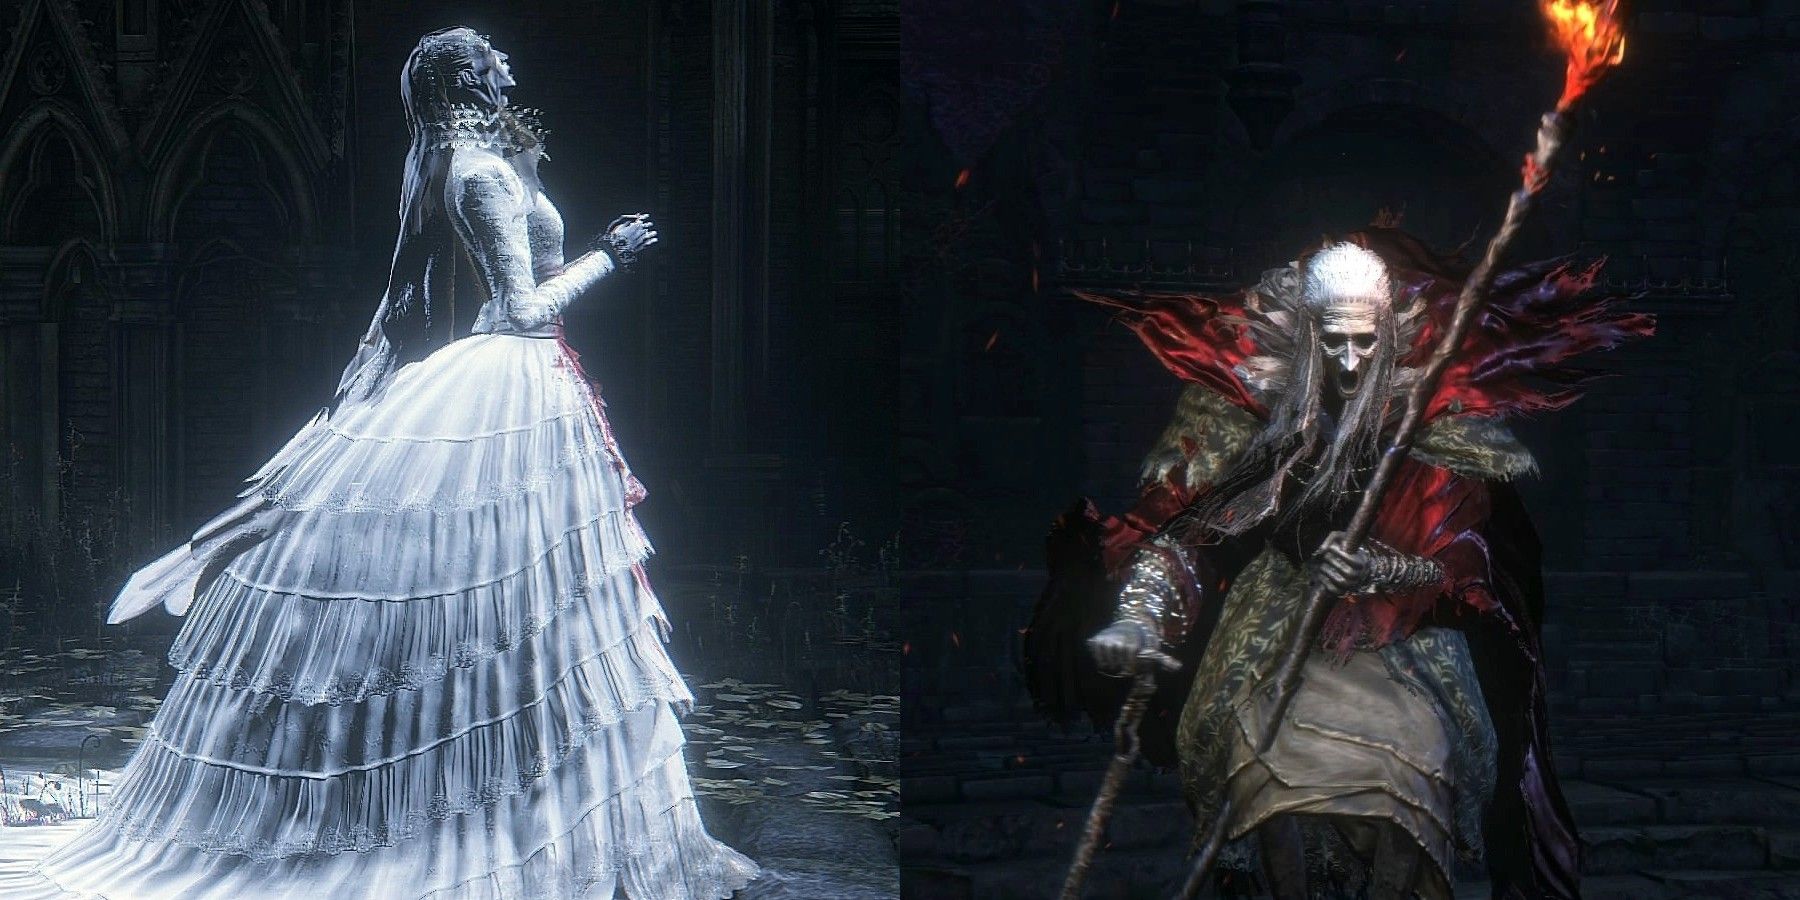 Bloodborne Queen Yharnam and Pthumerian side by side